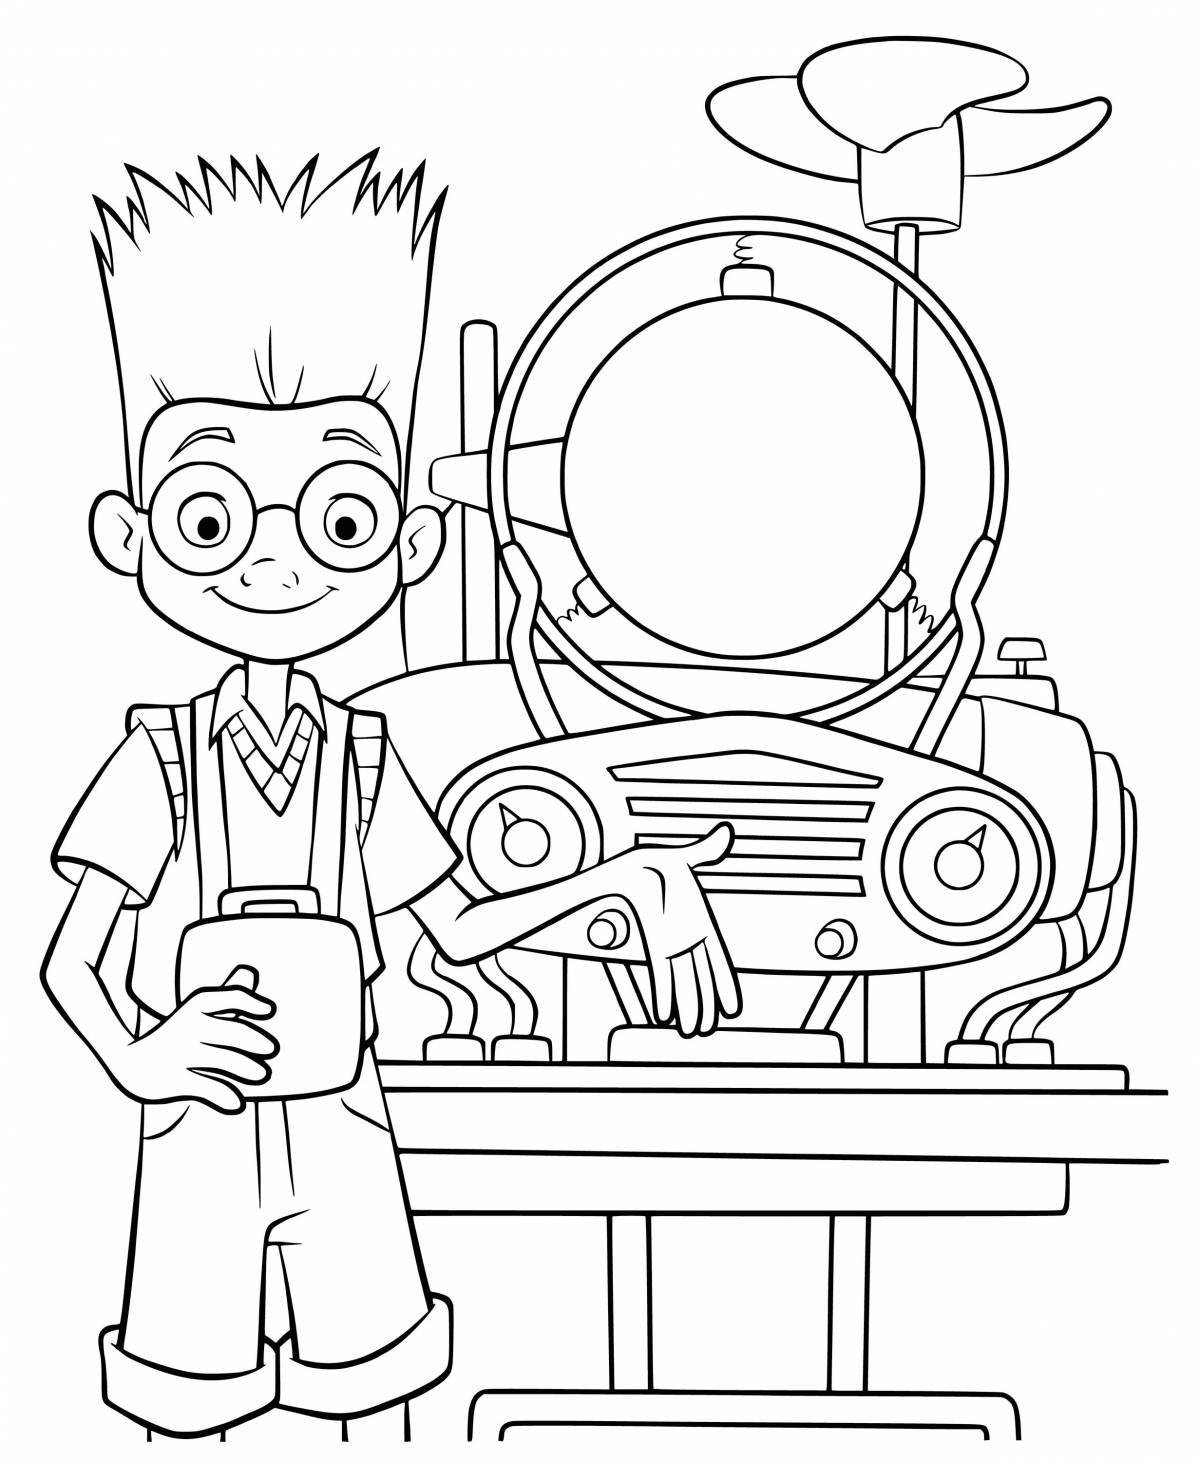 Fun coloring book for science and technology